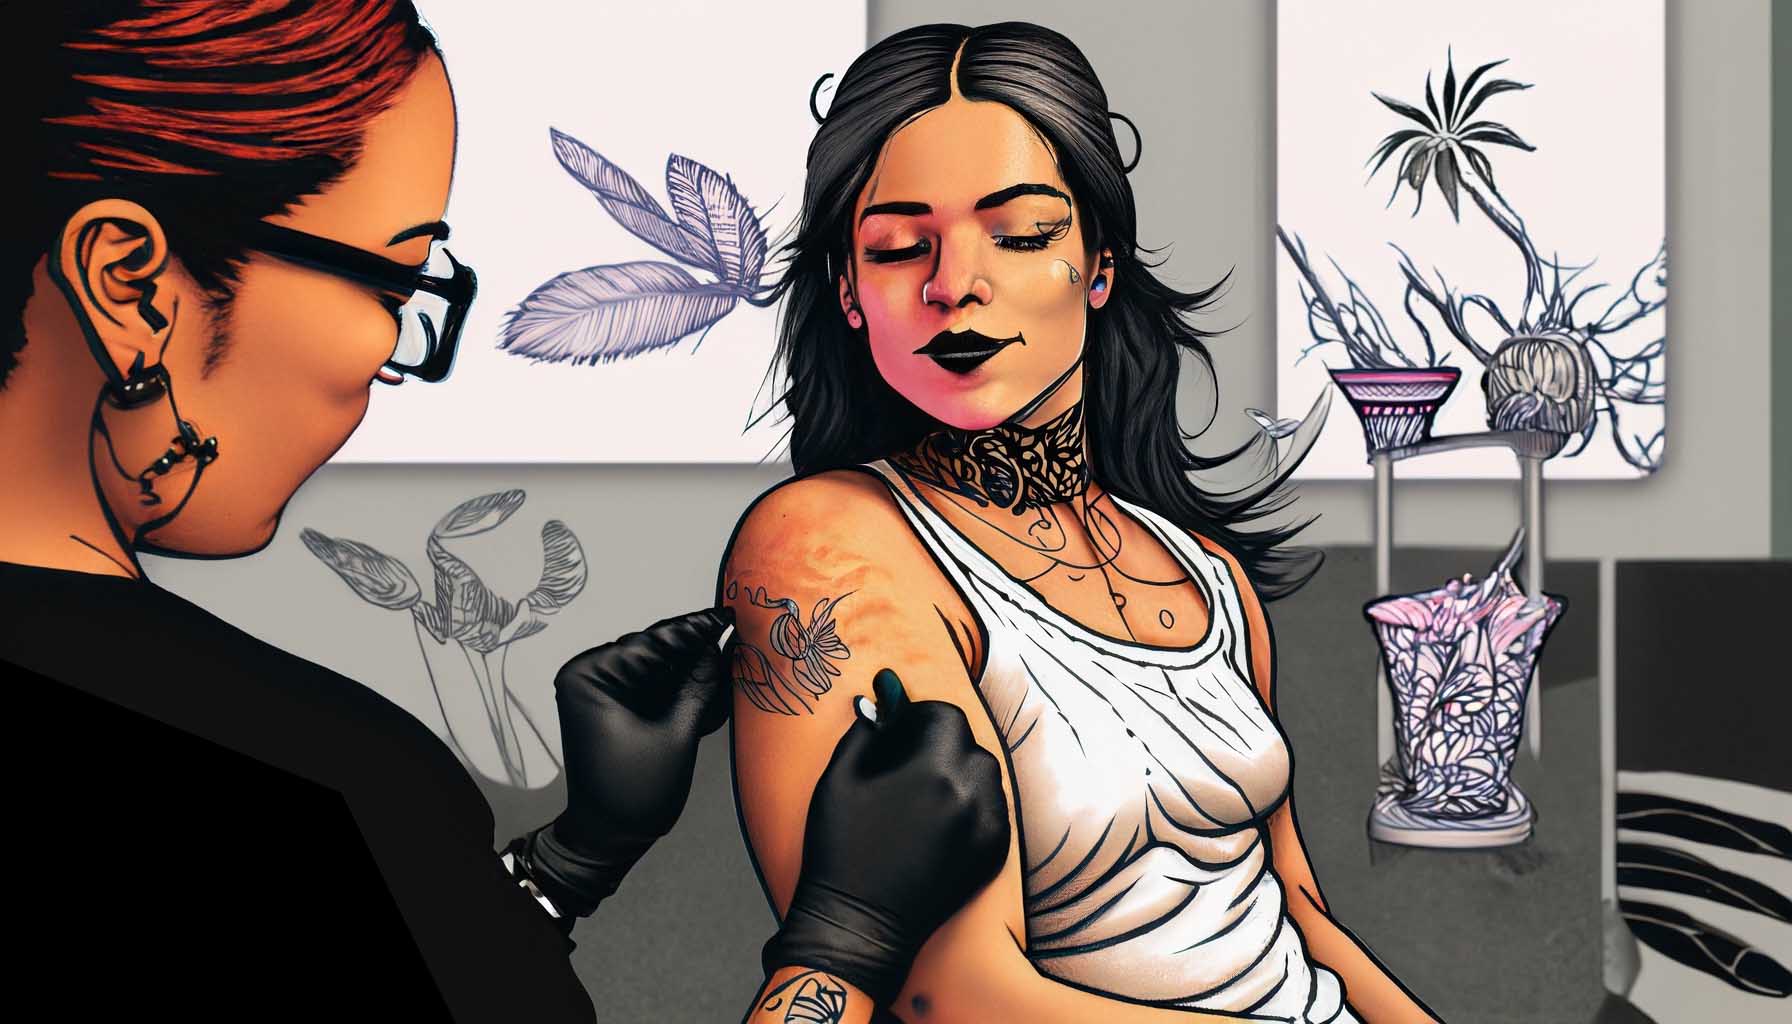 All-female tattoo shop makes its mark in male-dominated field | MPR News